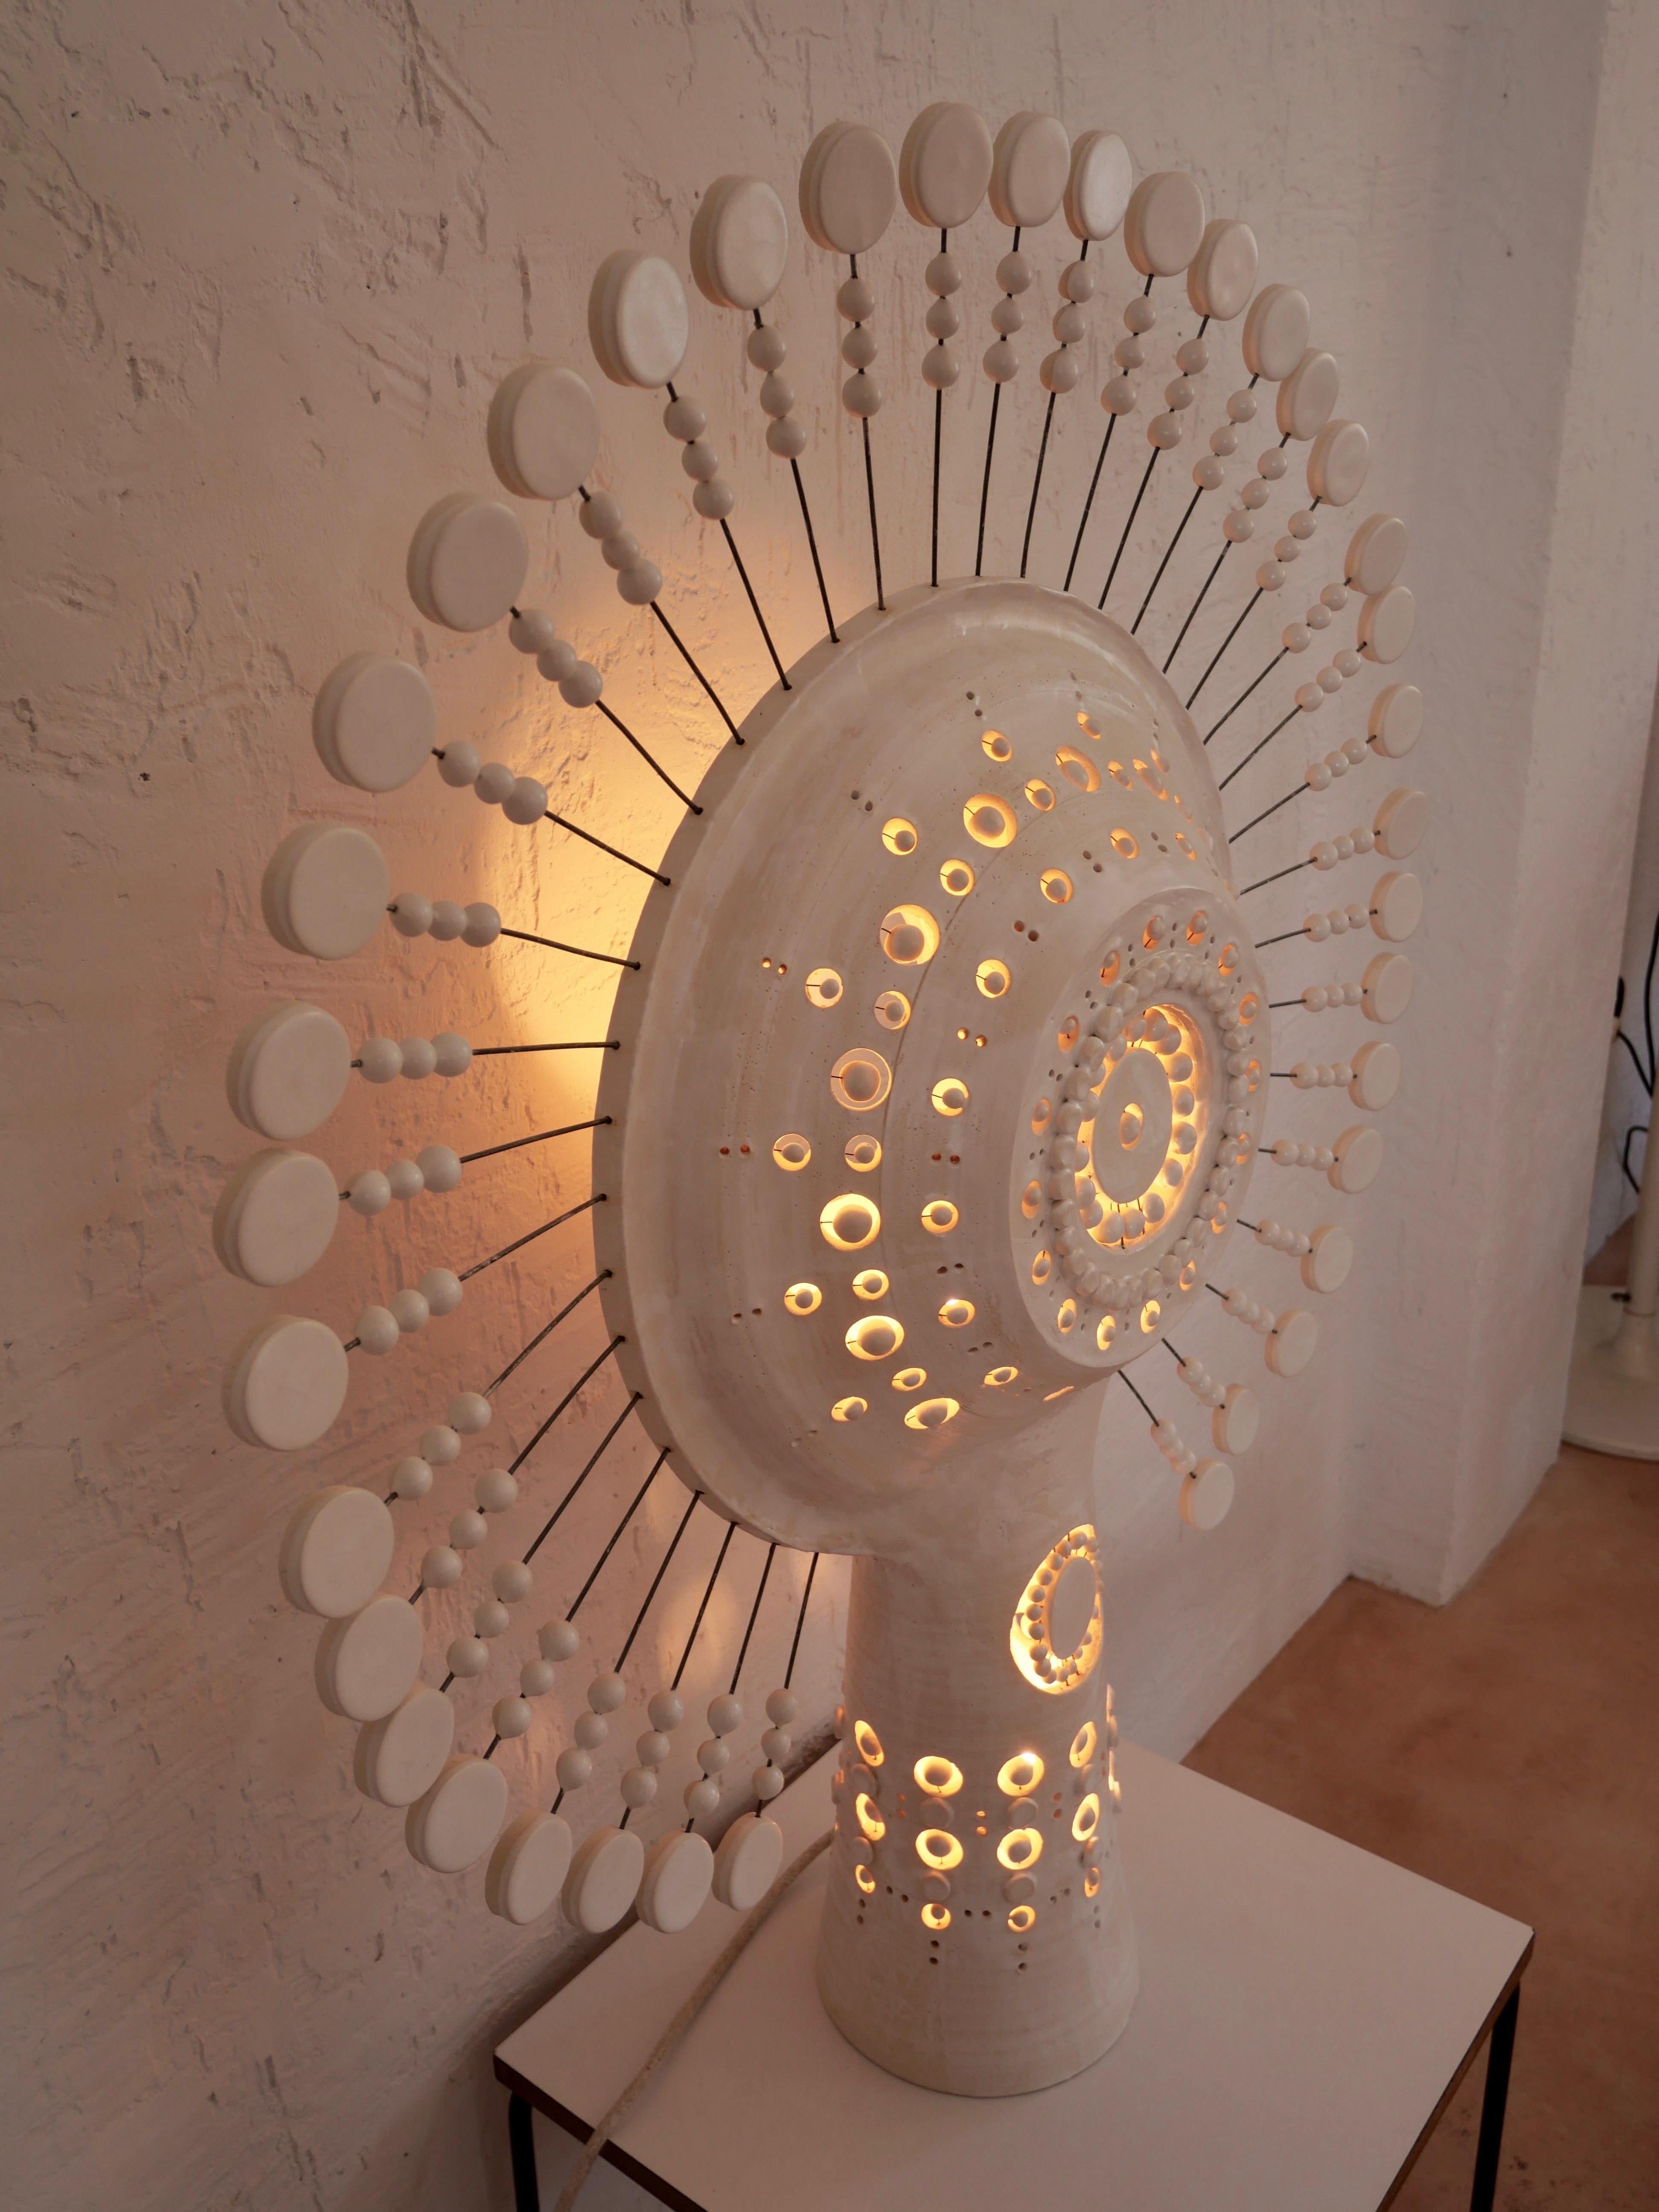 Other Georges Pelletier Sun Lamp in White Enameled Ceramic, France, 2020